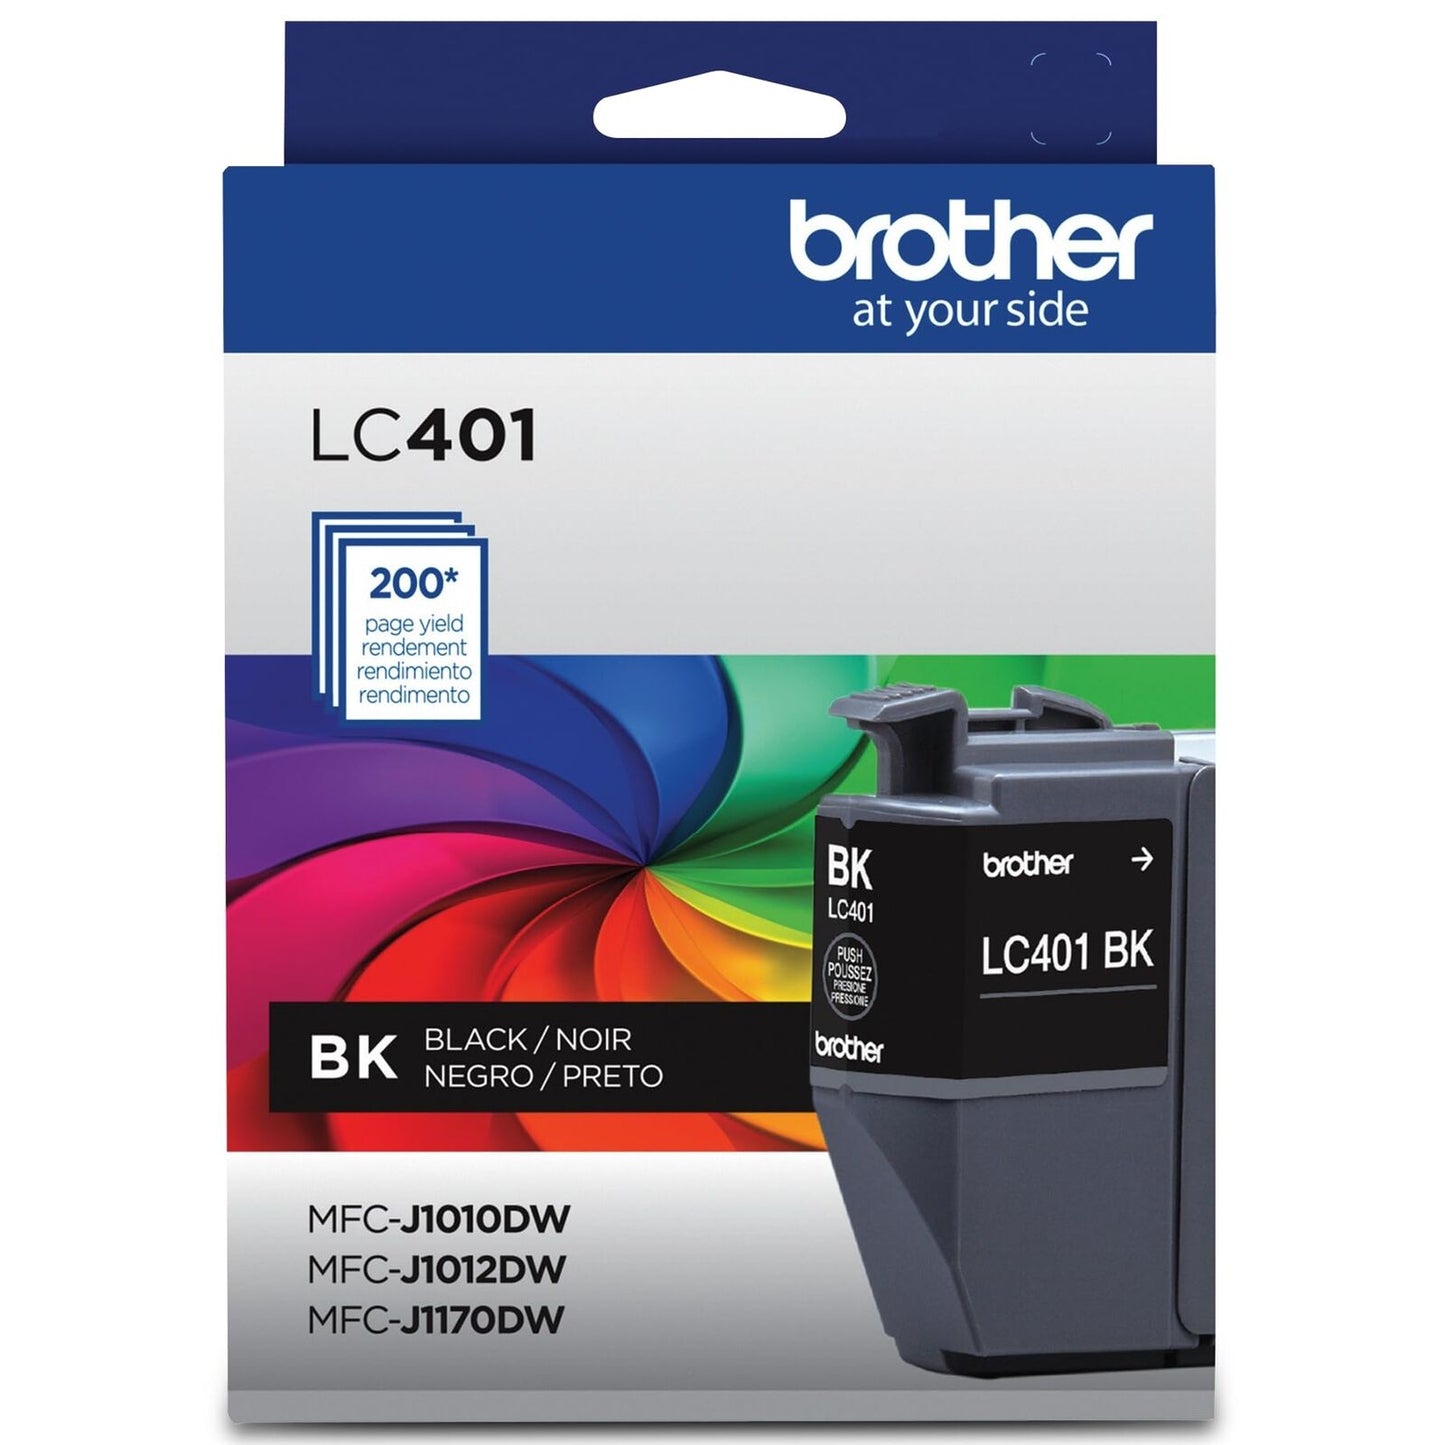 Brother LC401 Black Standard Yield Ink Cartridge Prints Up to 200 Pages